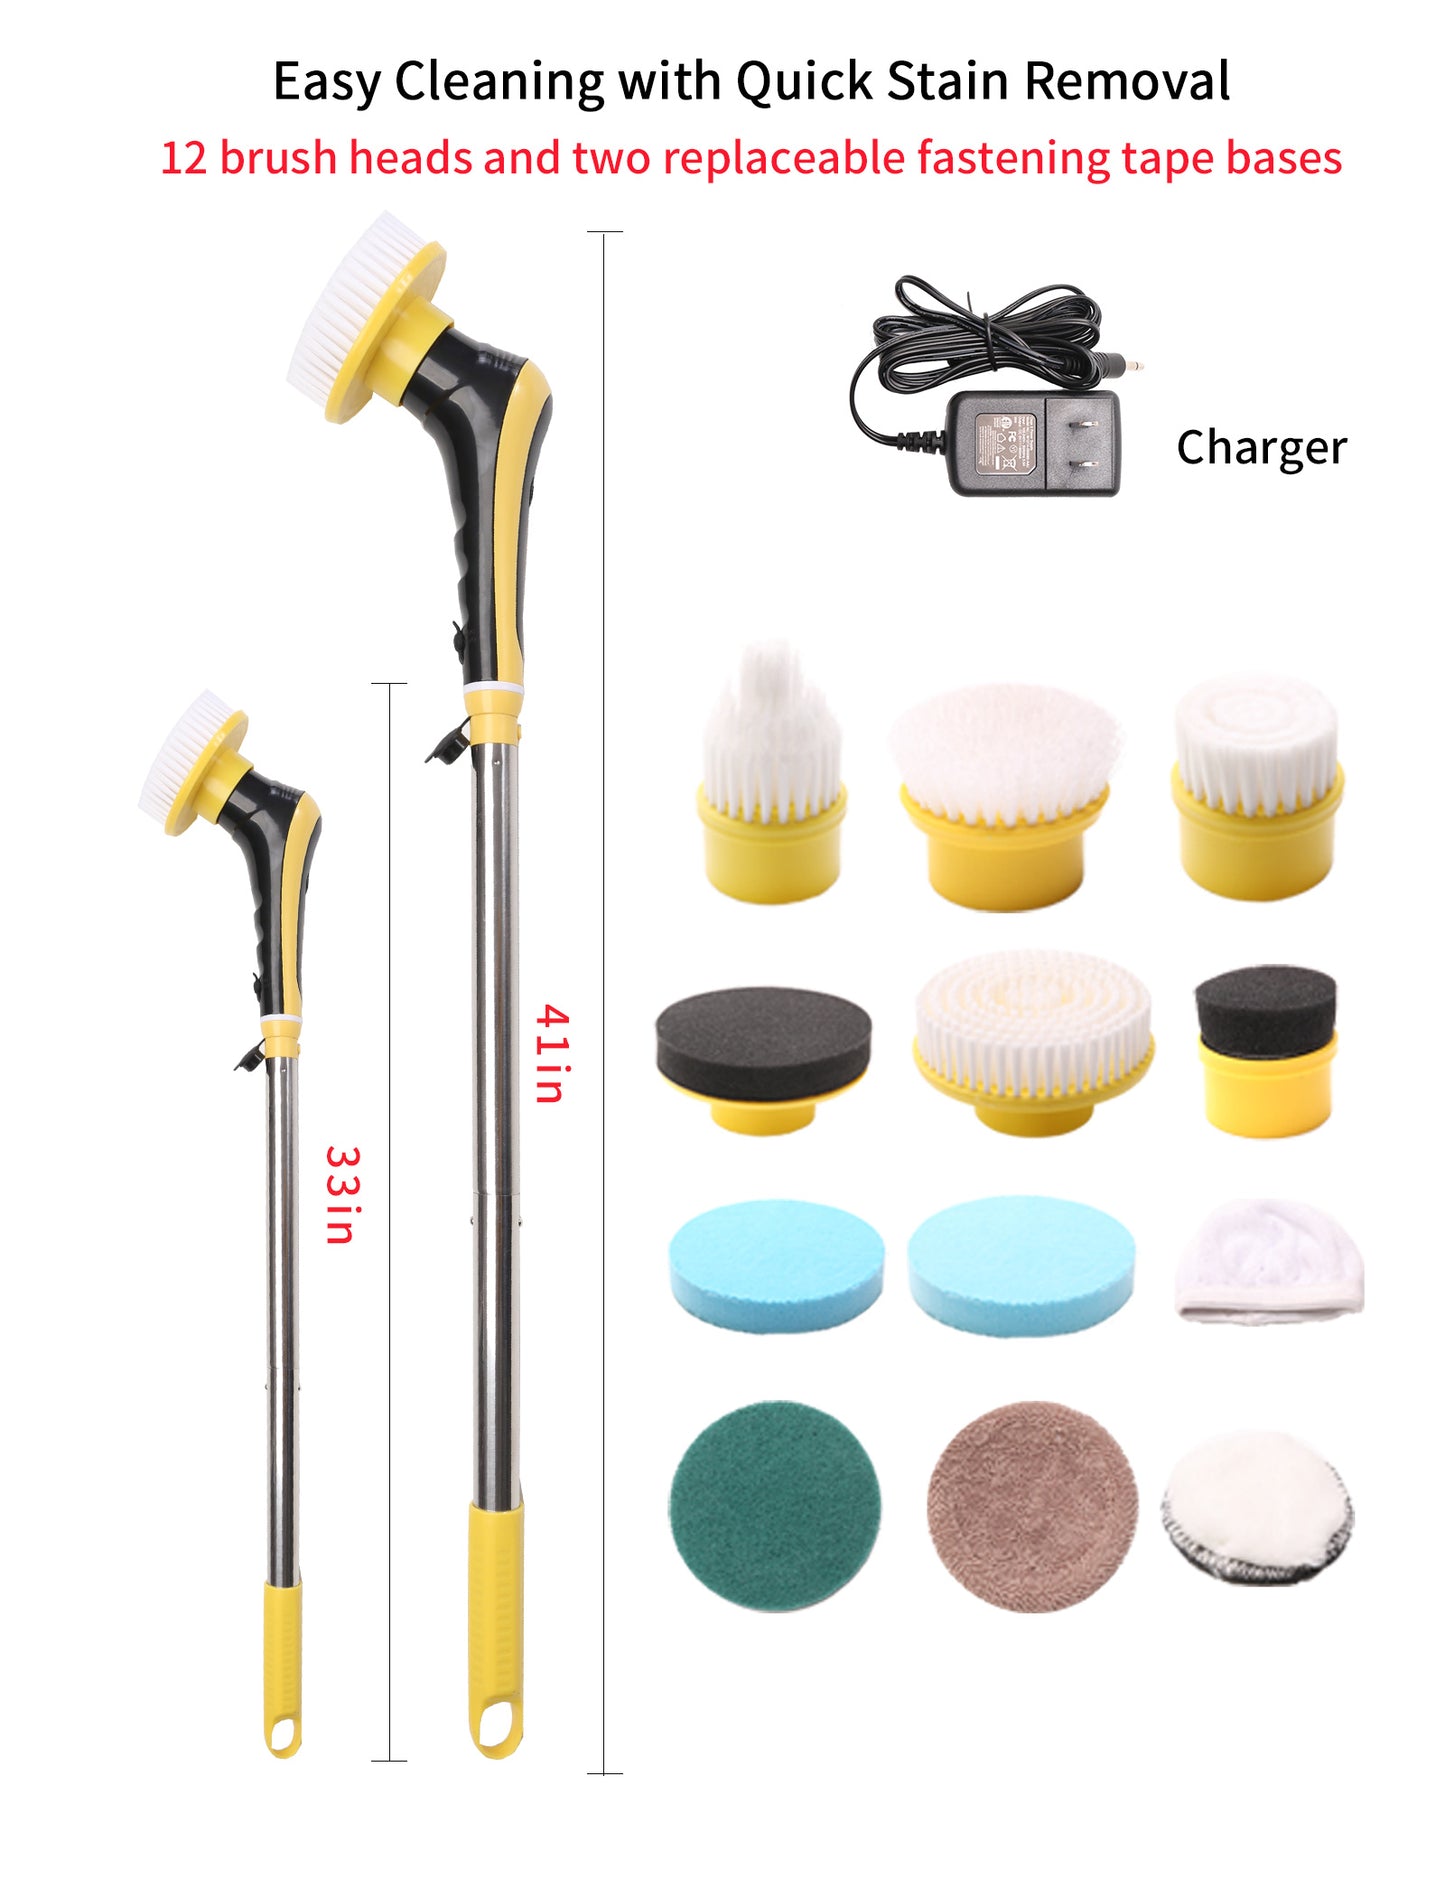 Electric Spin Scrubber Cordless Power Shower Cleaning Brush with 16 Replaceable Brush Heads and Adjustable Extension Handle for Kitchen, Bathroom, Shower, Tub, Tile, Floor, Car (16 Brush Heads)